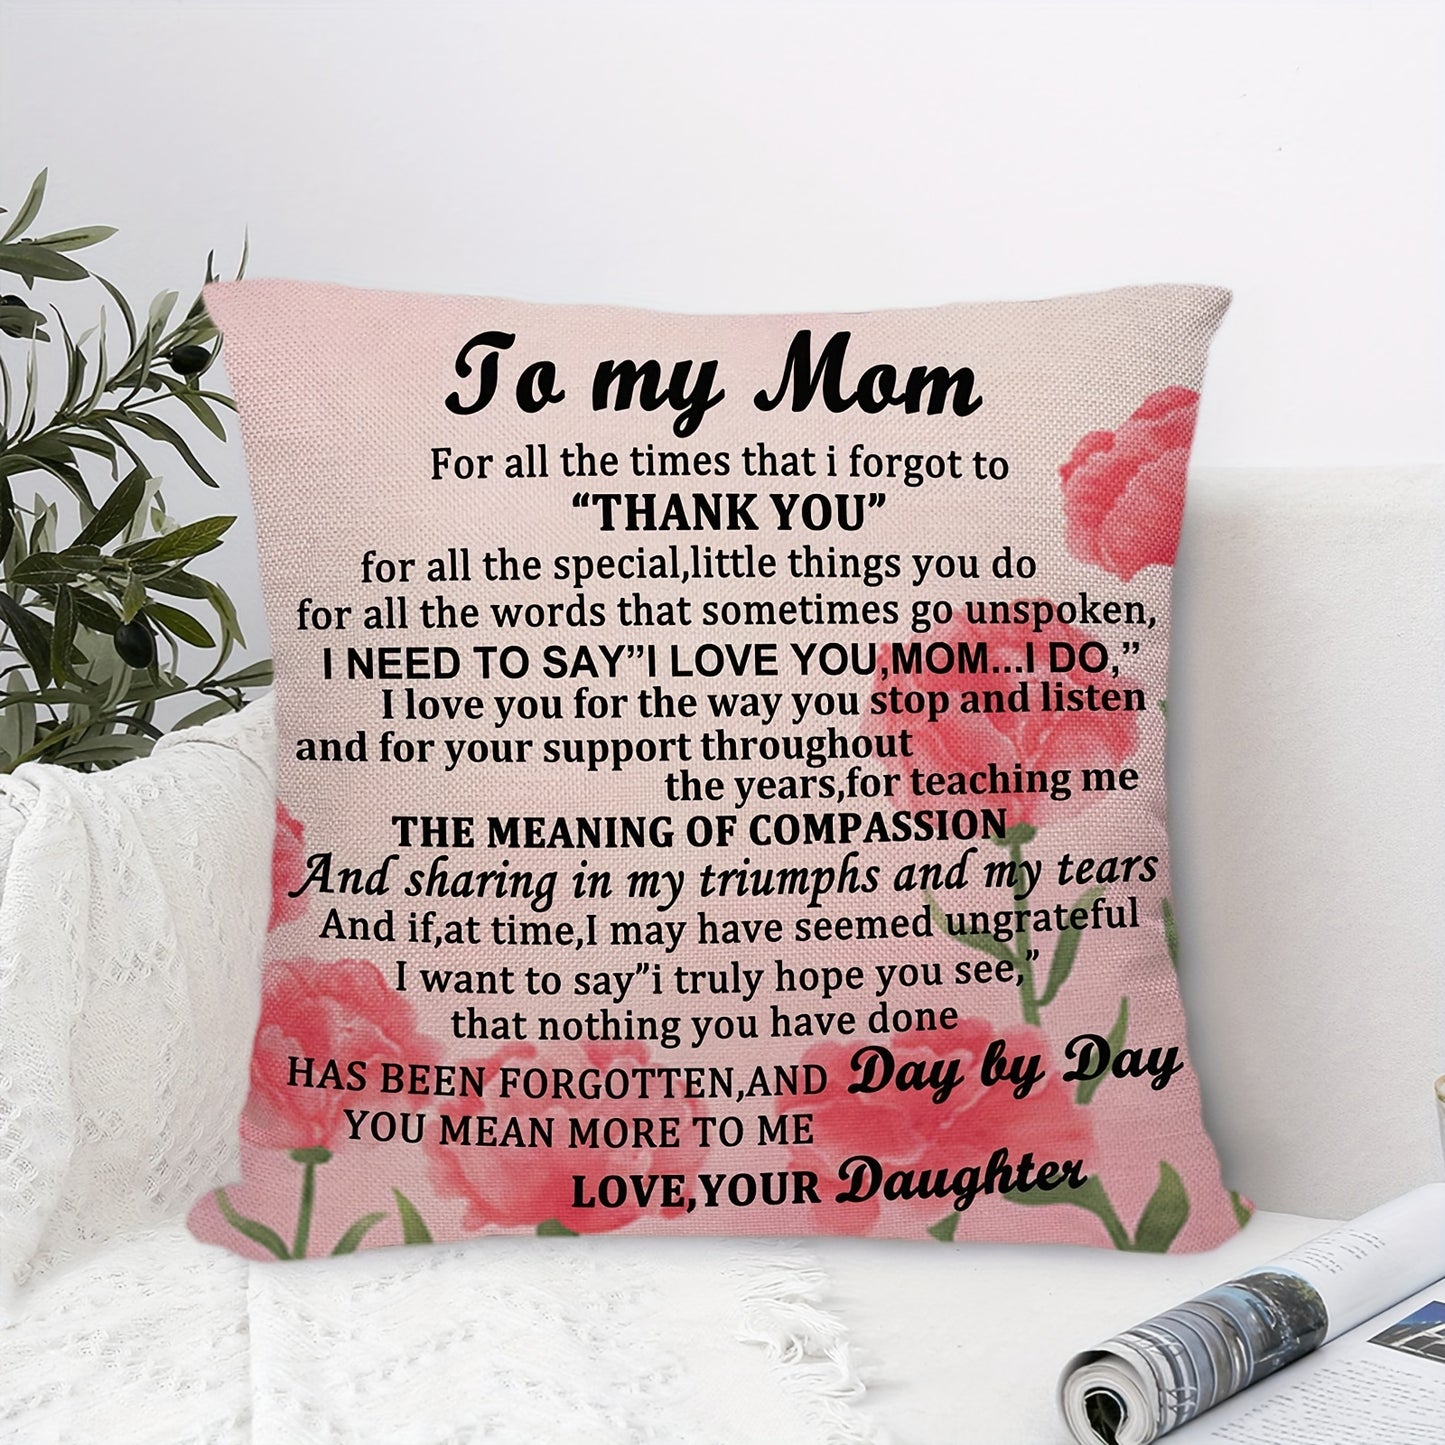 1pc, Best Gift To Mom Square Linen Cushion Cover (18''x18''), Beautiful Hug Pillow Cover, Home Decor, Room Decor, Bedroom Decor, Collectible Buildings Accessories, Mother's Day Gift (Cushion Is Not Included)